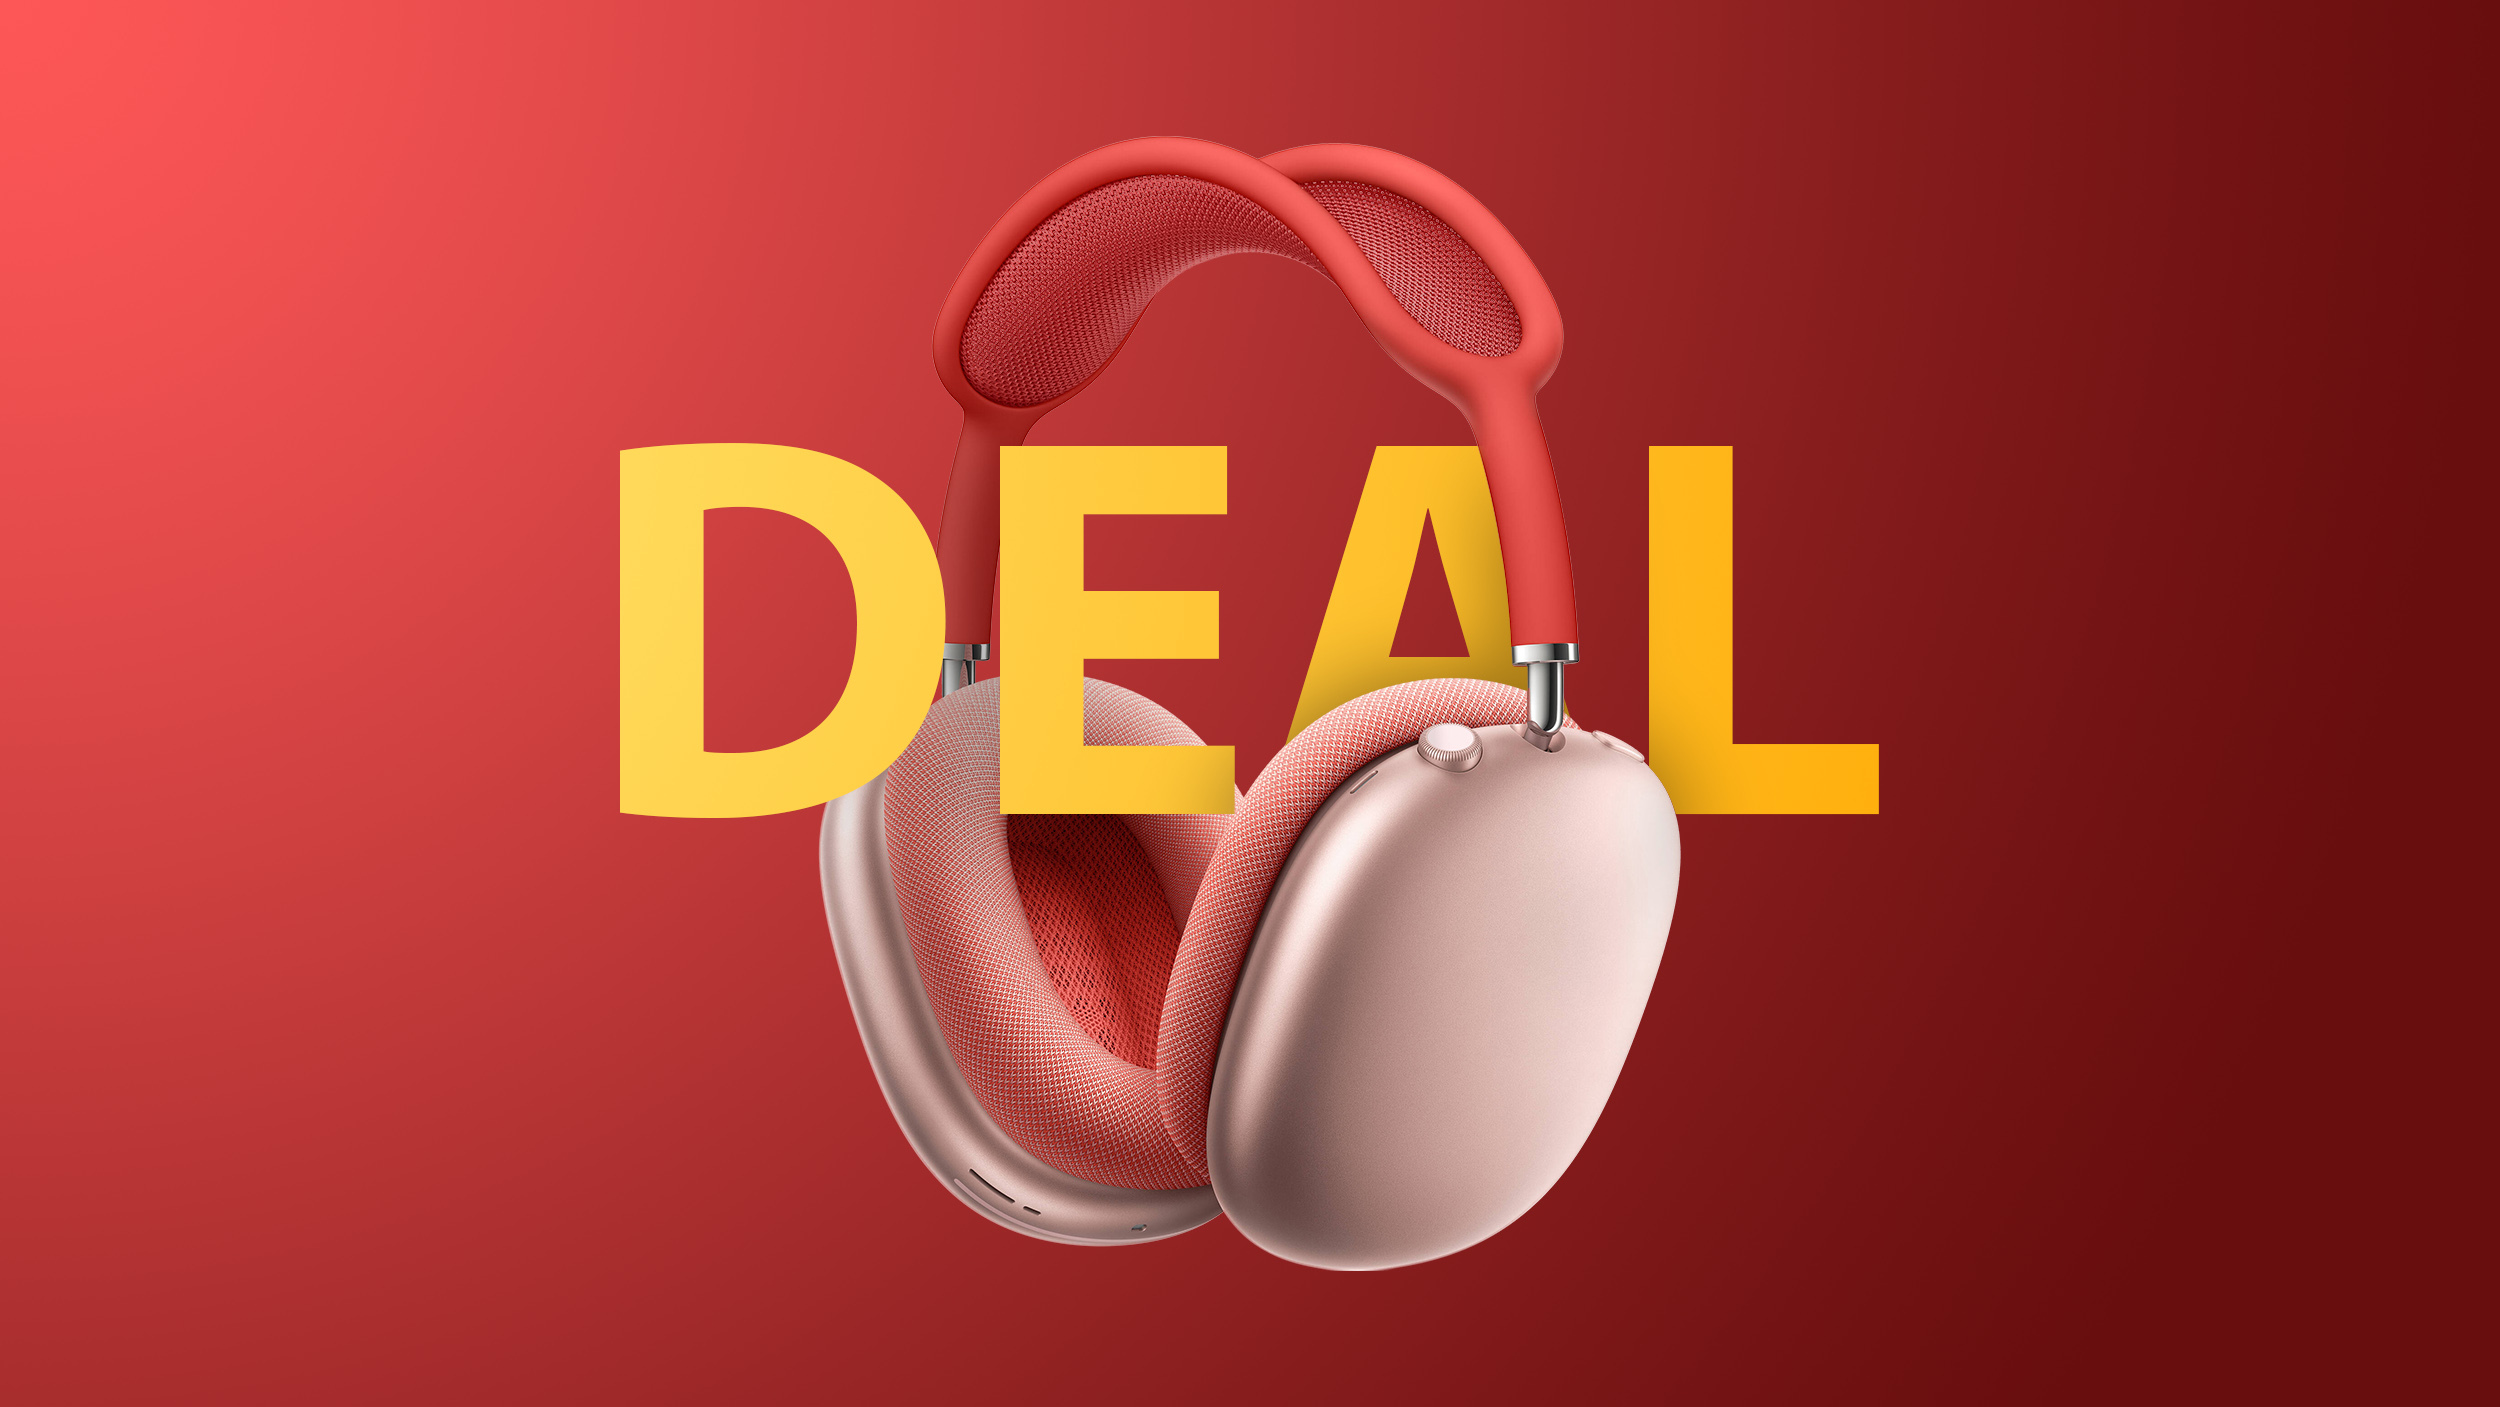 Deals: AirPods Max Discounted to $429 on Amazon in Every Color ($120 Off)